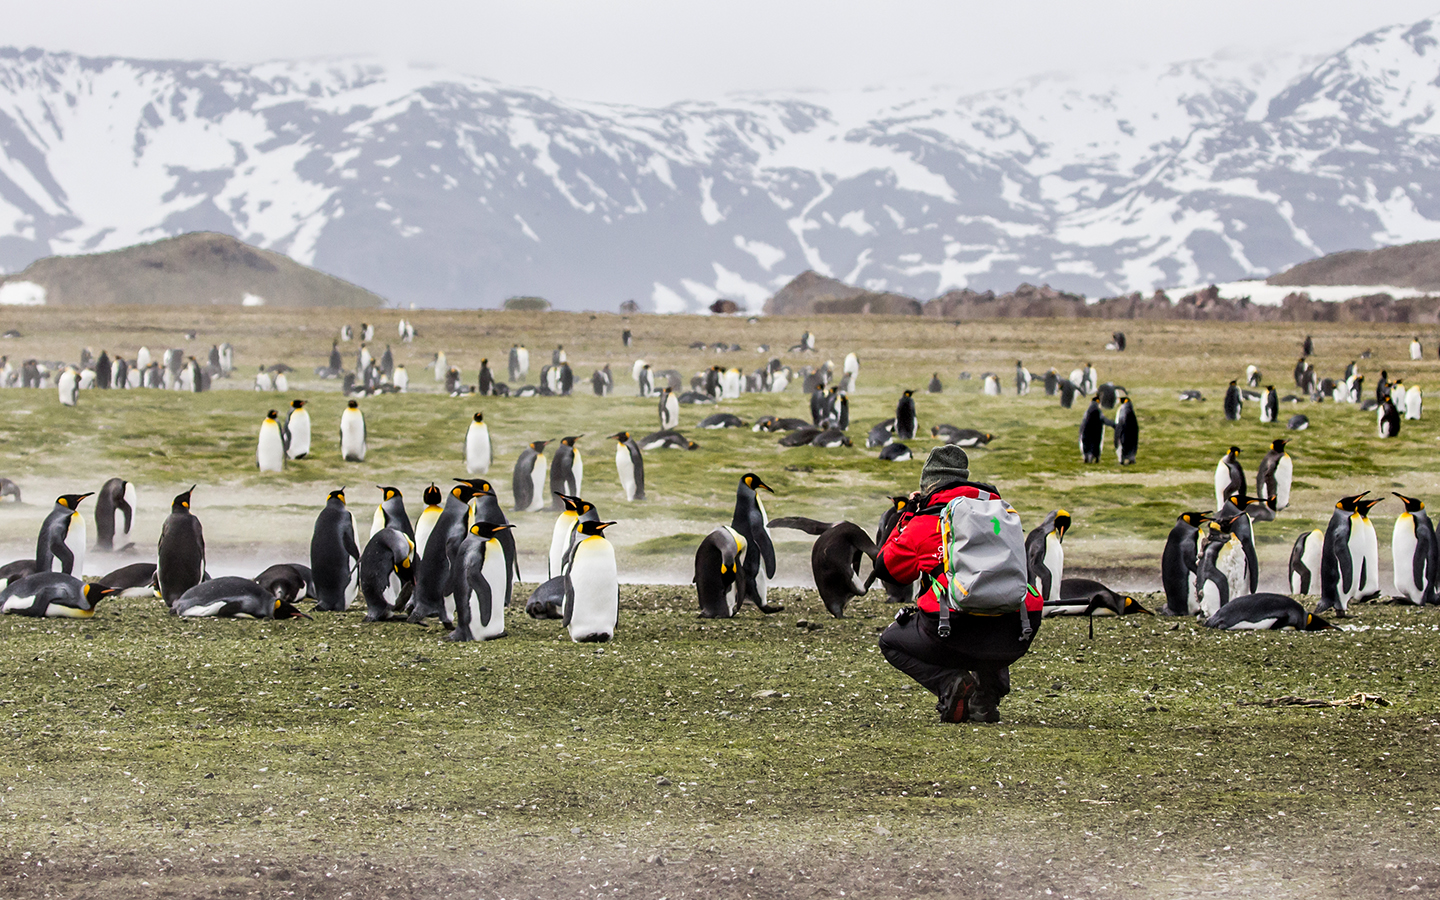 Guest in red jacket and grey backpack squats among colony of king penguins in South Georgia Antarctica taking photos of wildlife